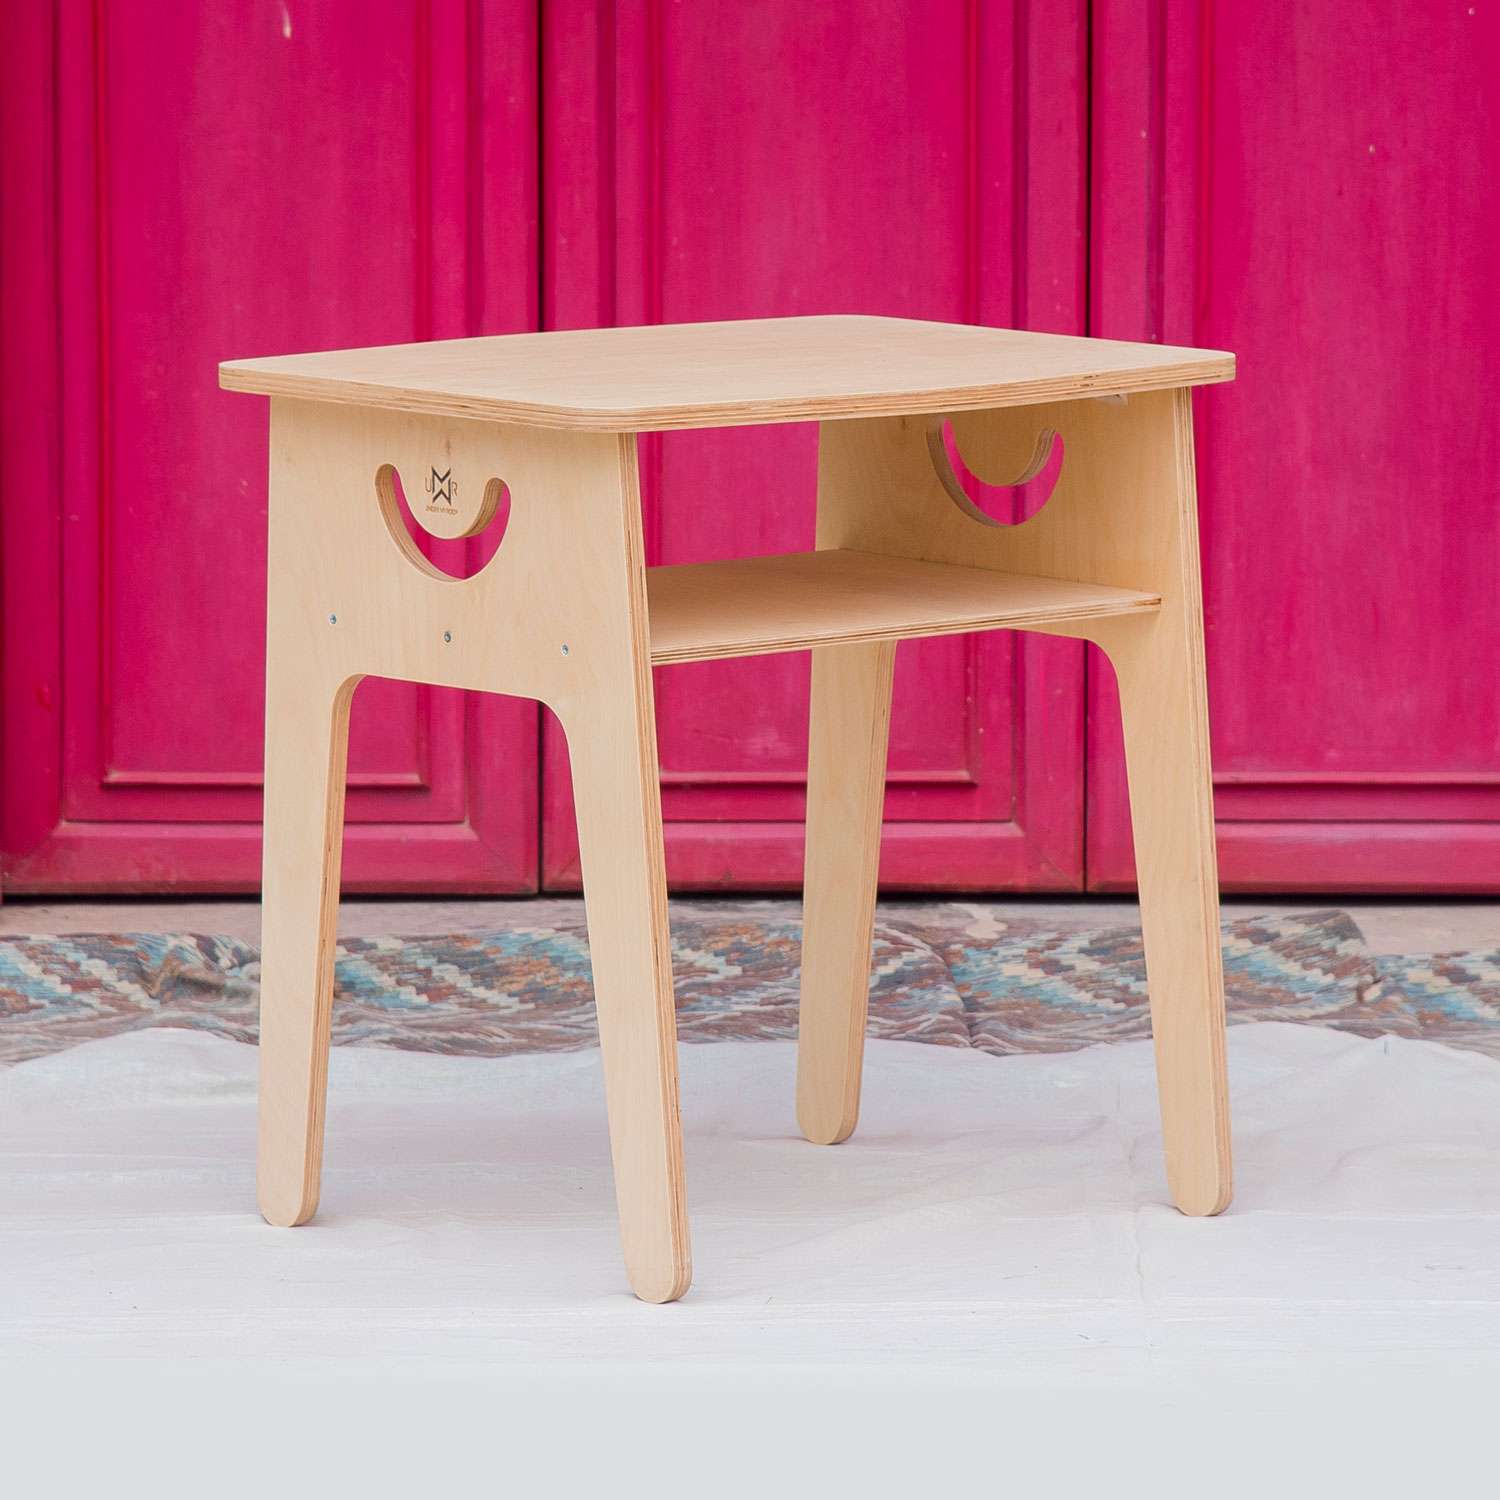 Lime Fig Table - 18"